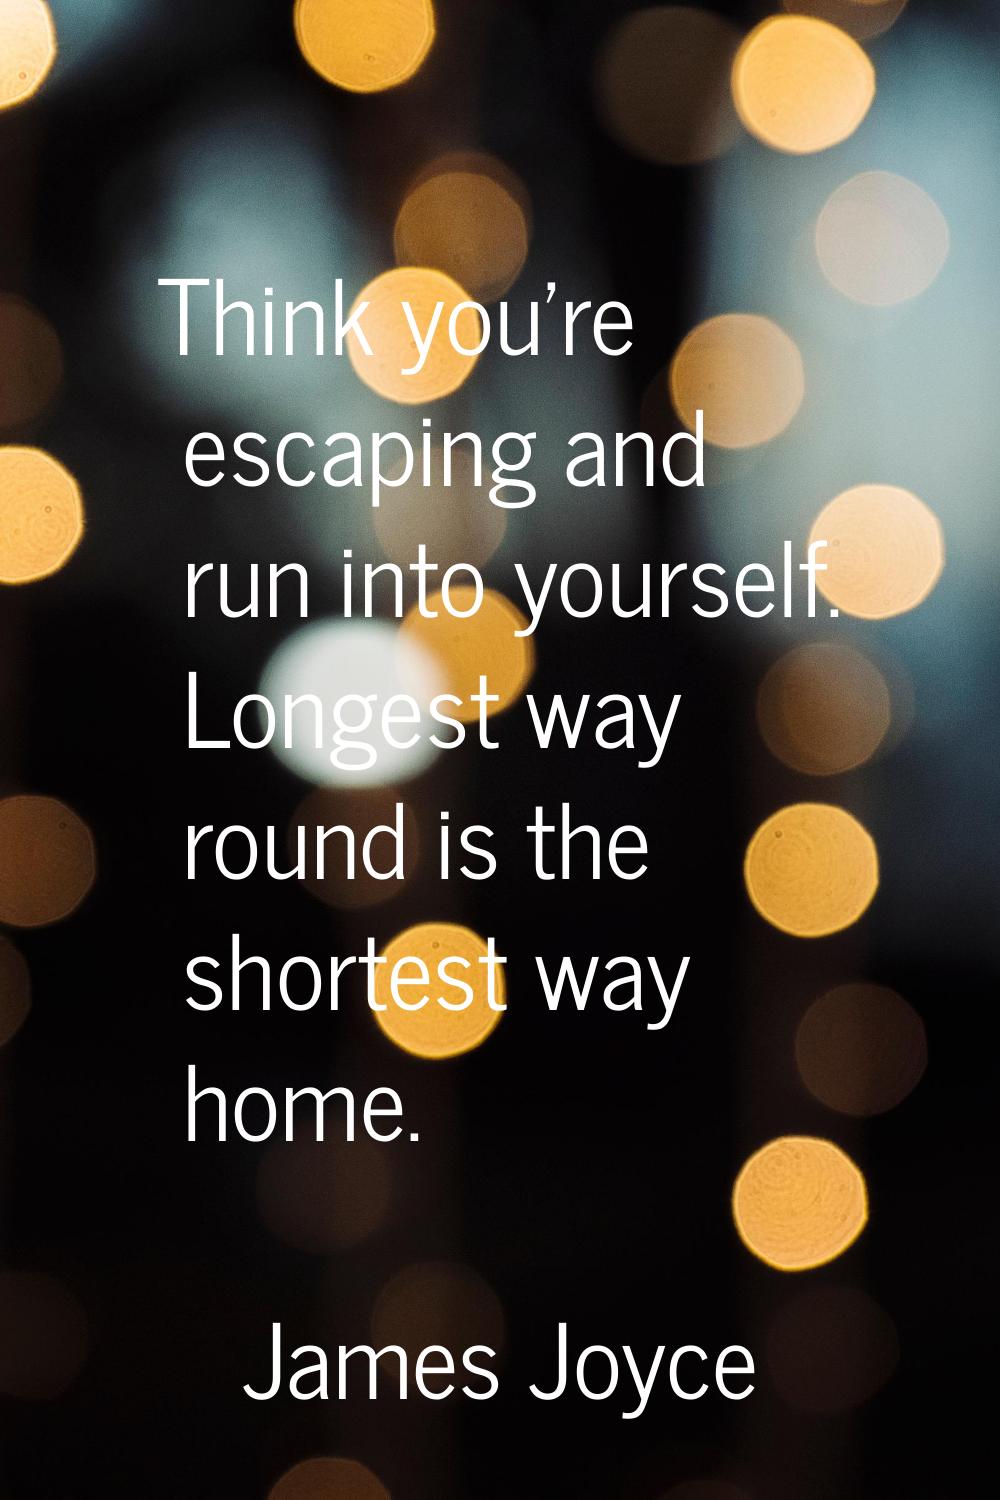 Think you're escaping and run into yourself. Longest way round is the shortest way home.